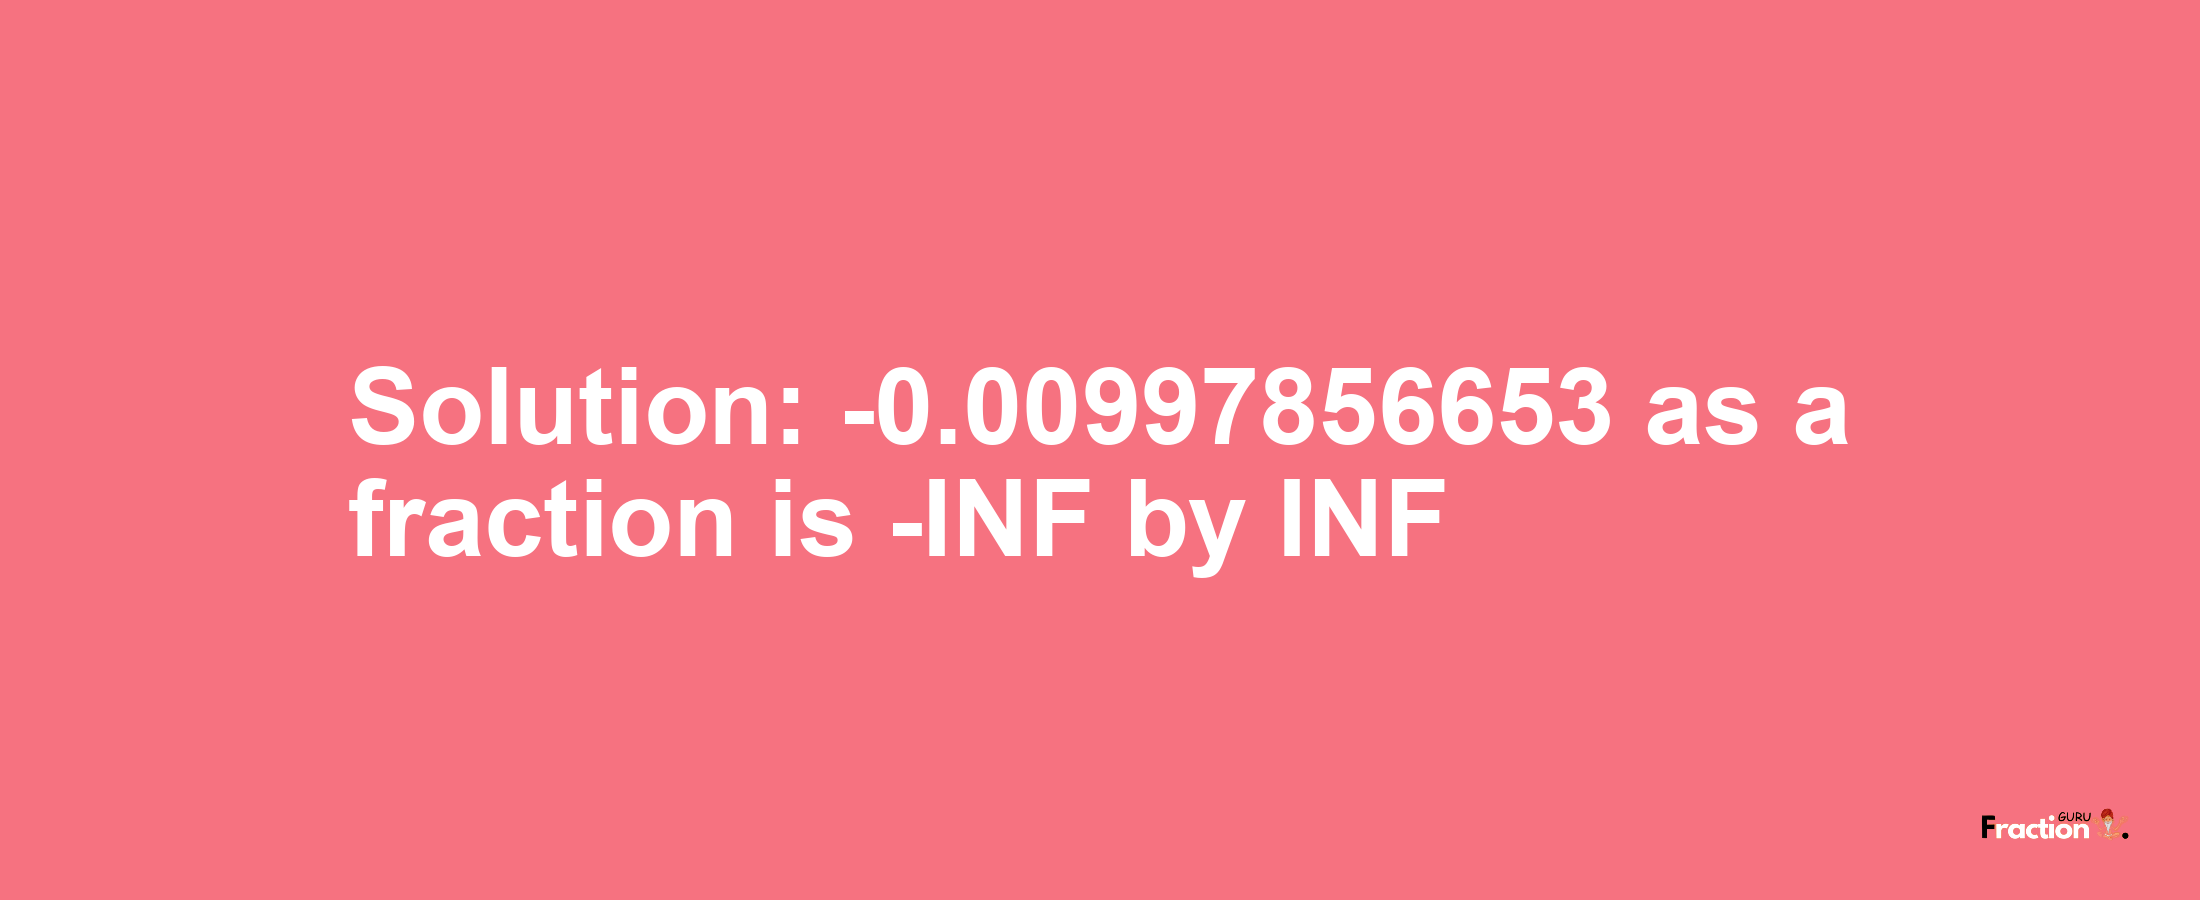 Solution:-0.00997856653 as a fraction is -INF/INF